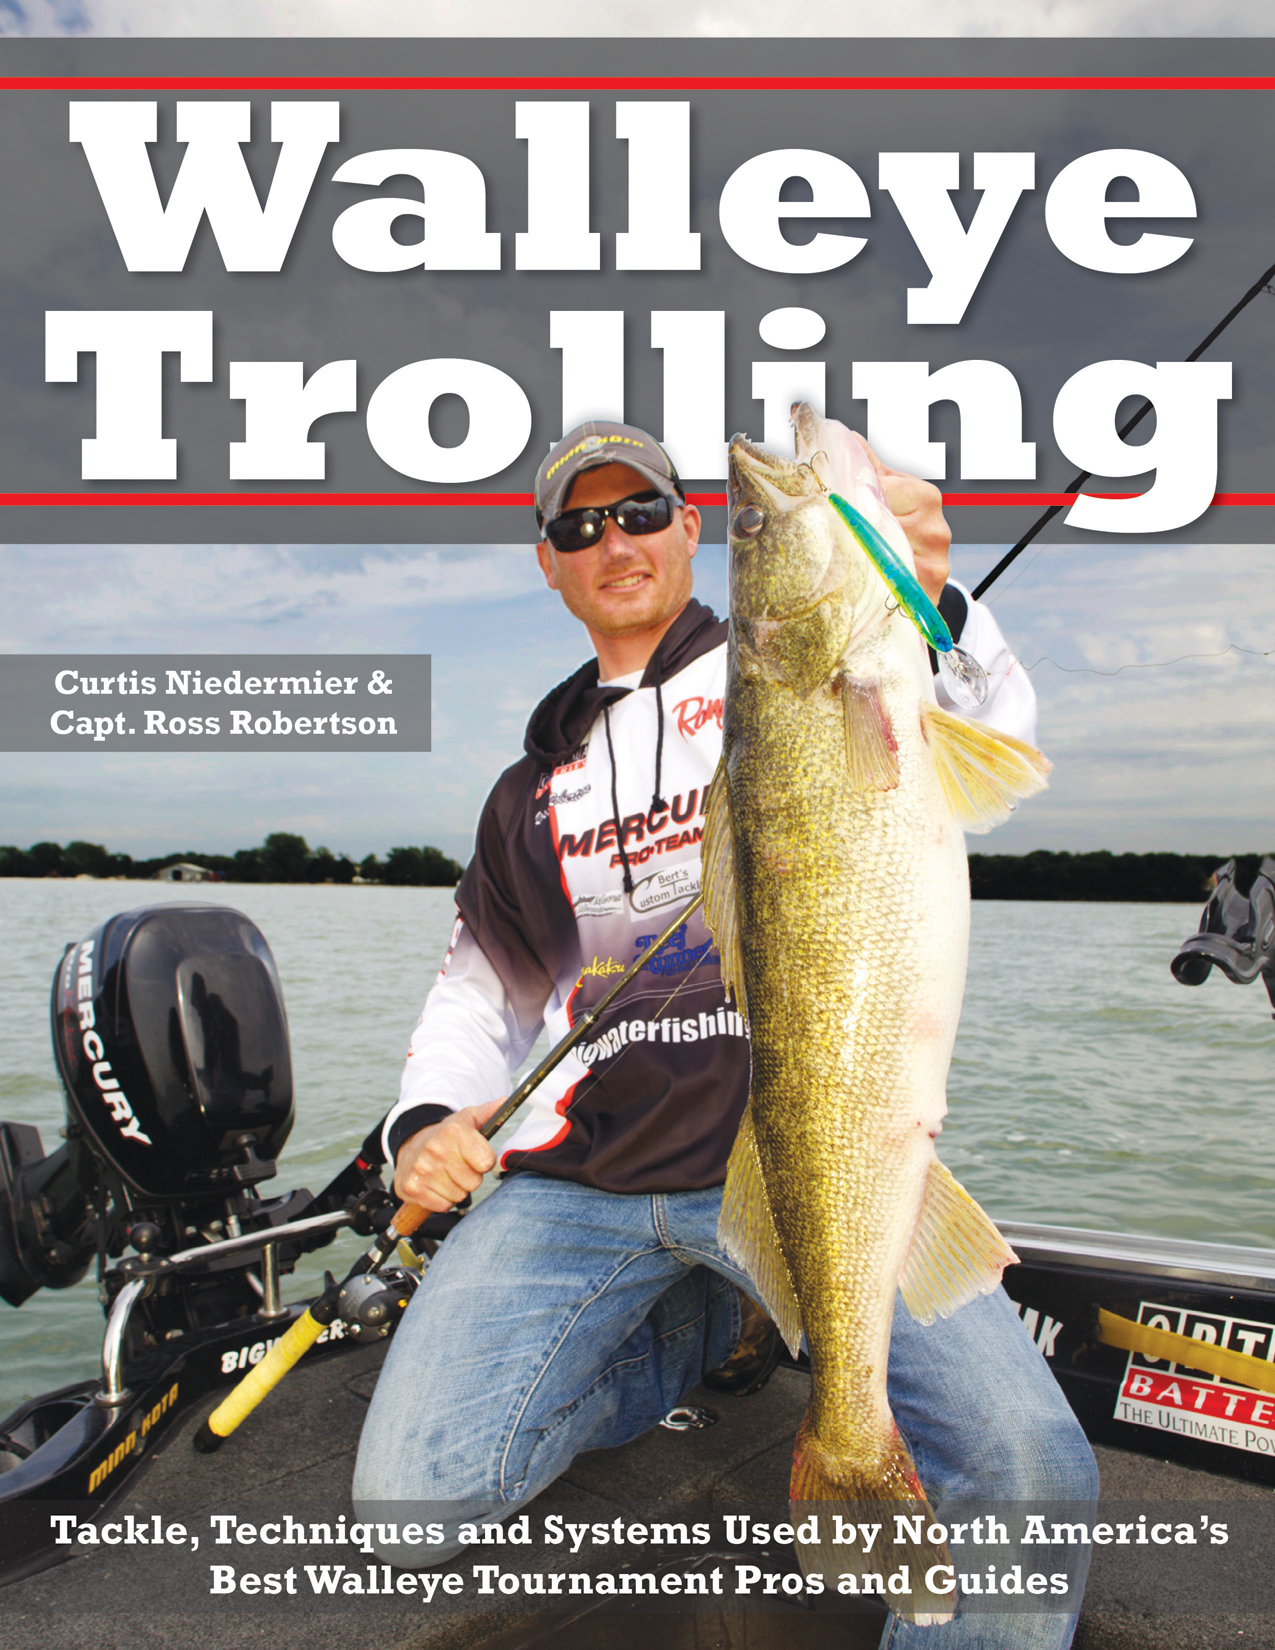 New Book Showcases Walleye Trolling Tactics and Untold Stories of  Industry's Top Professional Walleye Anglers